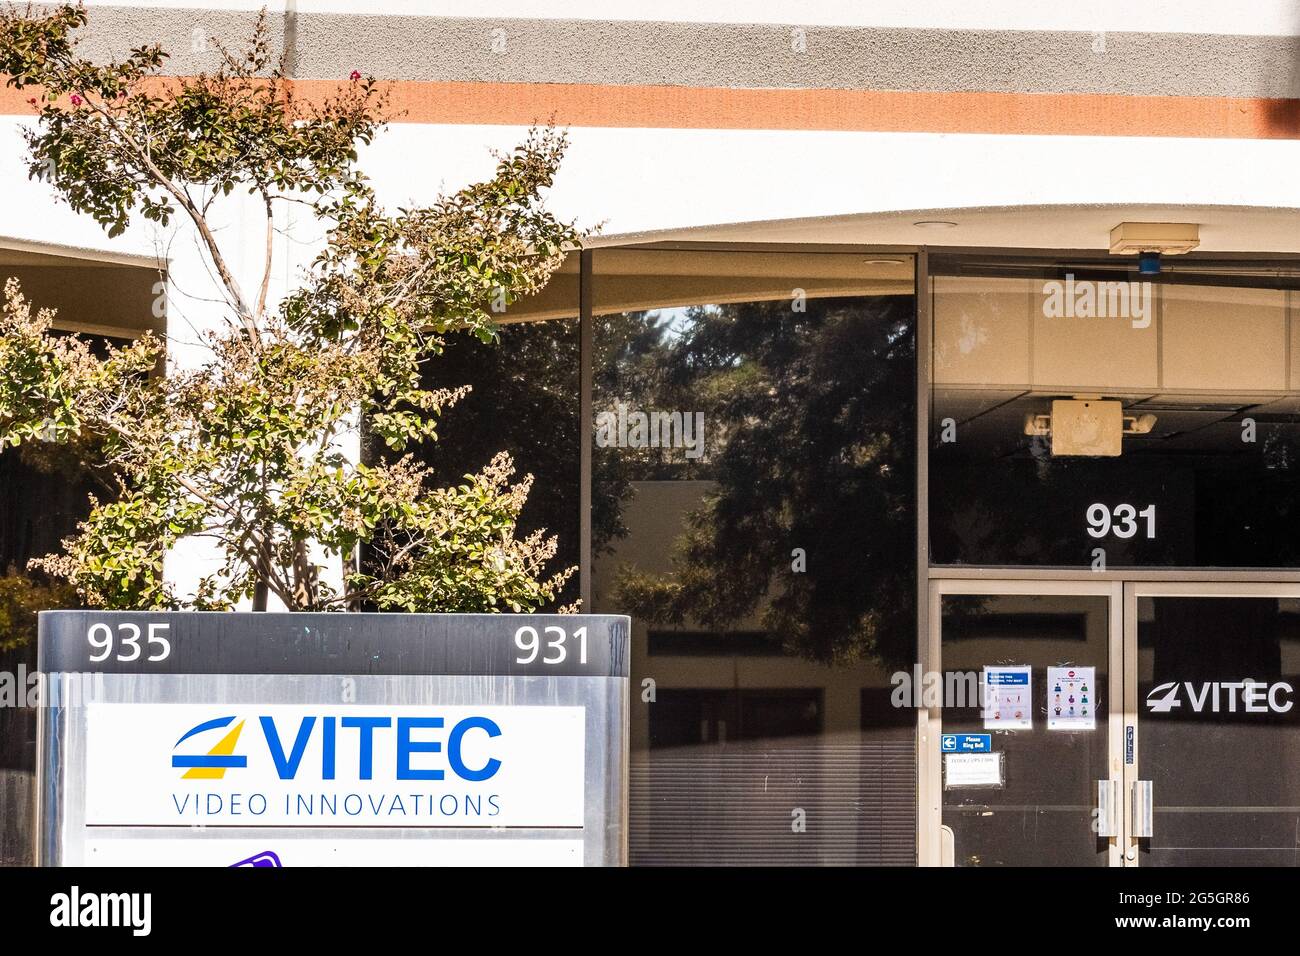 Sep 26, 2020 Sunnyvale / CA / USA - Vitec HQ in Silicon Valley; Vitec is a provider of professional-grade digital video products for streaming & deliv Stock Photo